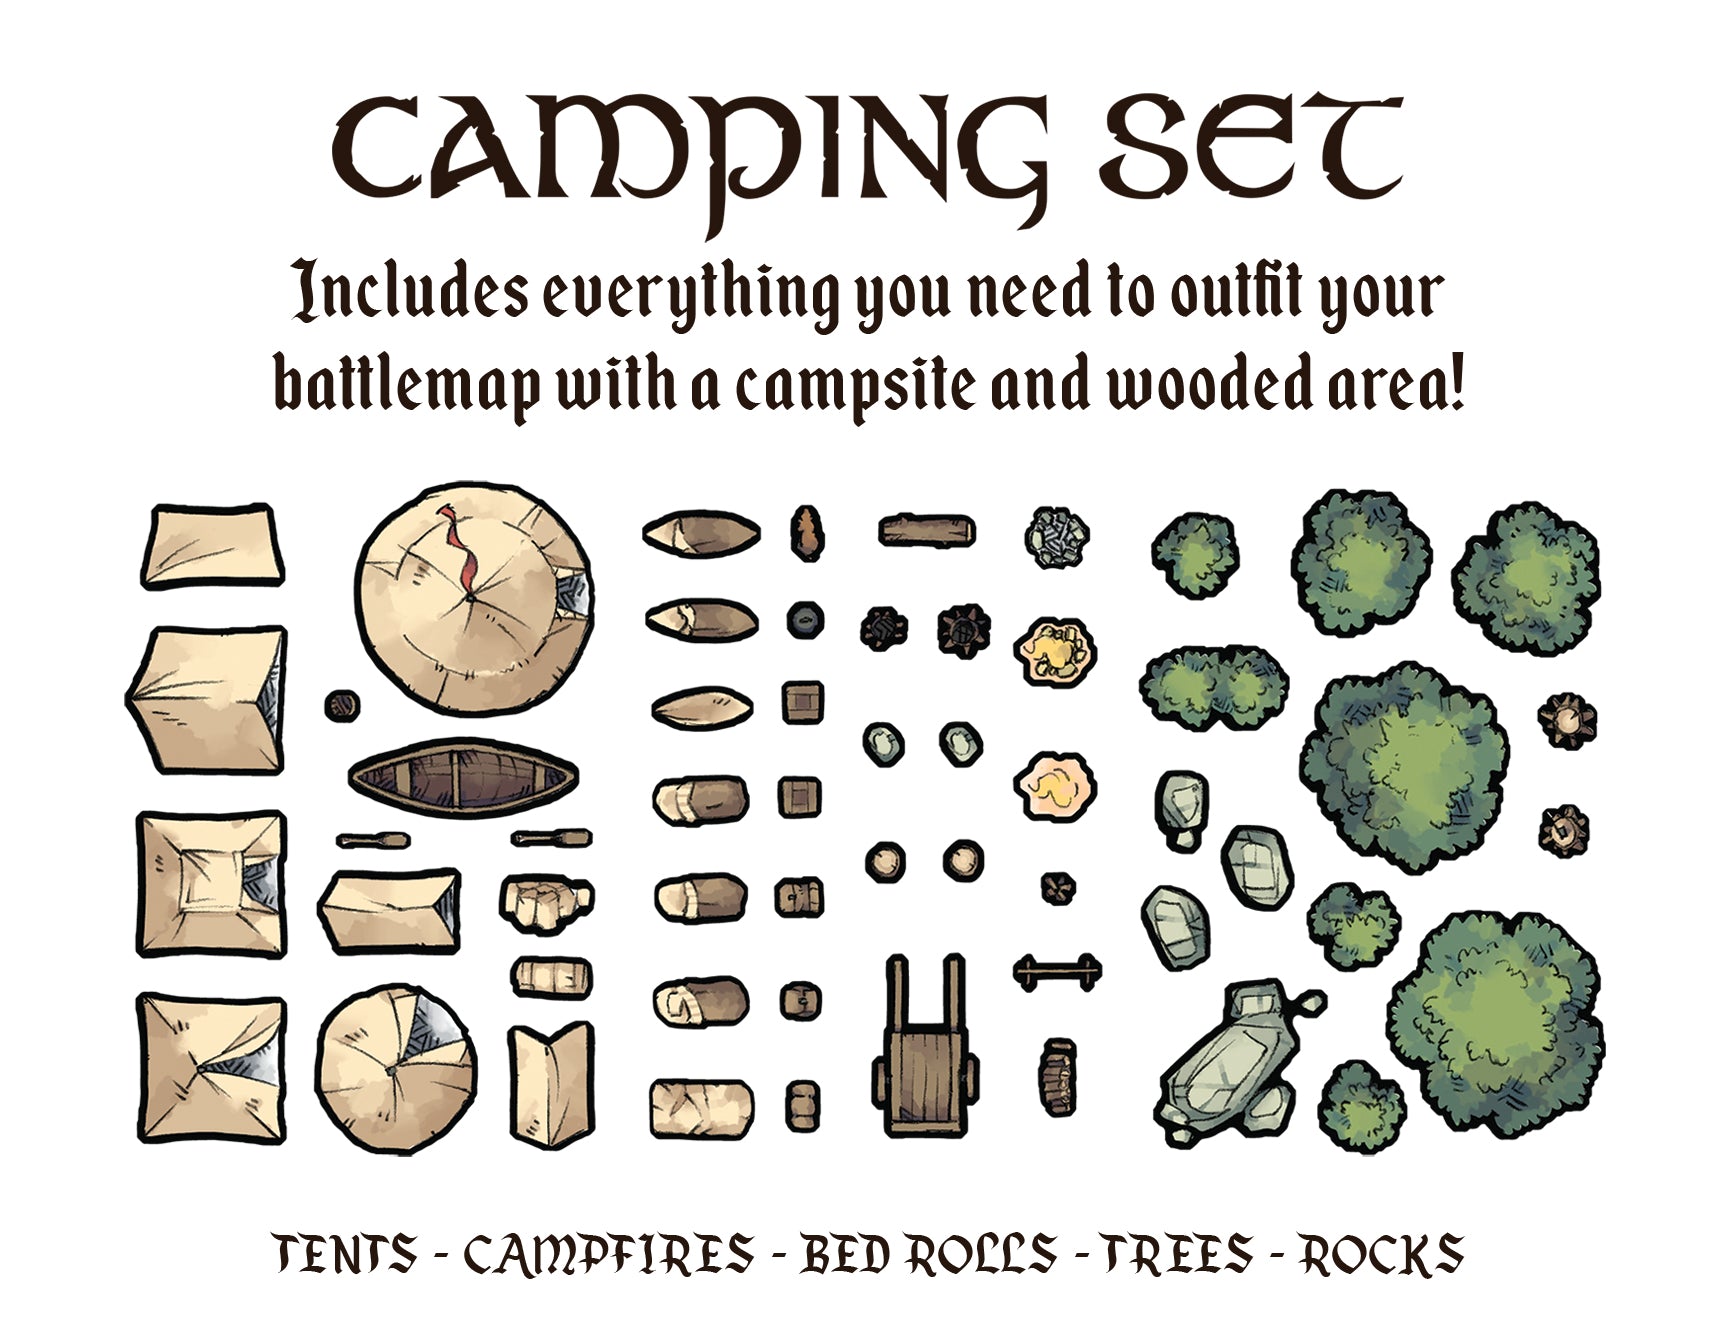 Geektankgames camping set - includes everything you need to outfit your battlemap with a campsite and wooded area. includes trees, rocks, camp equipment and more